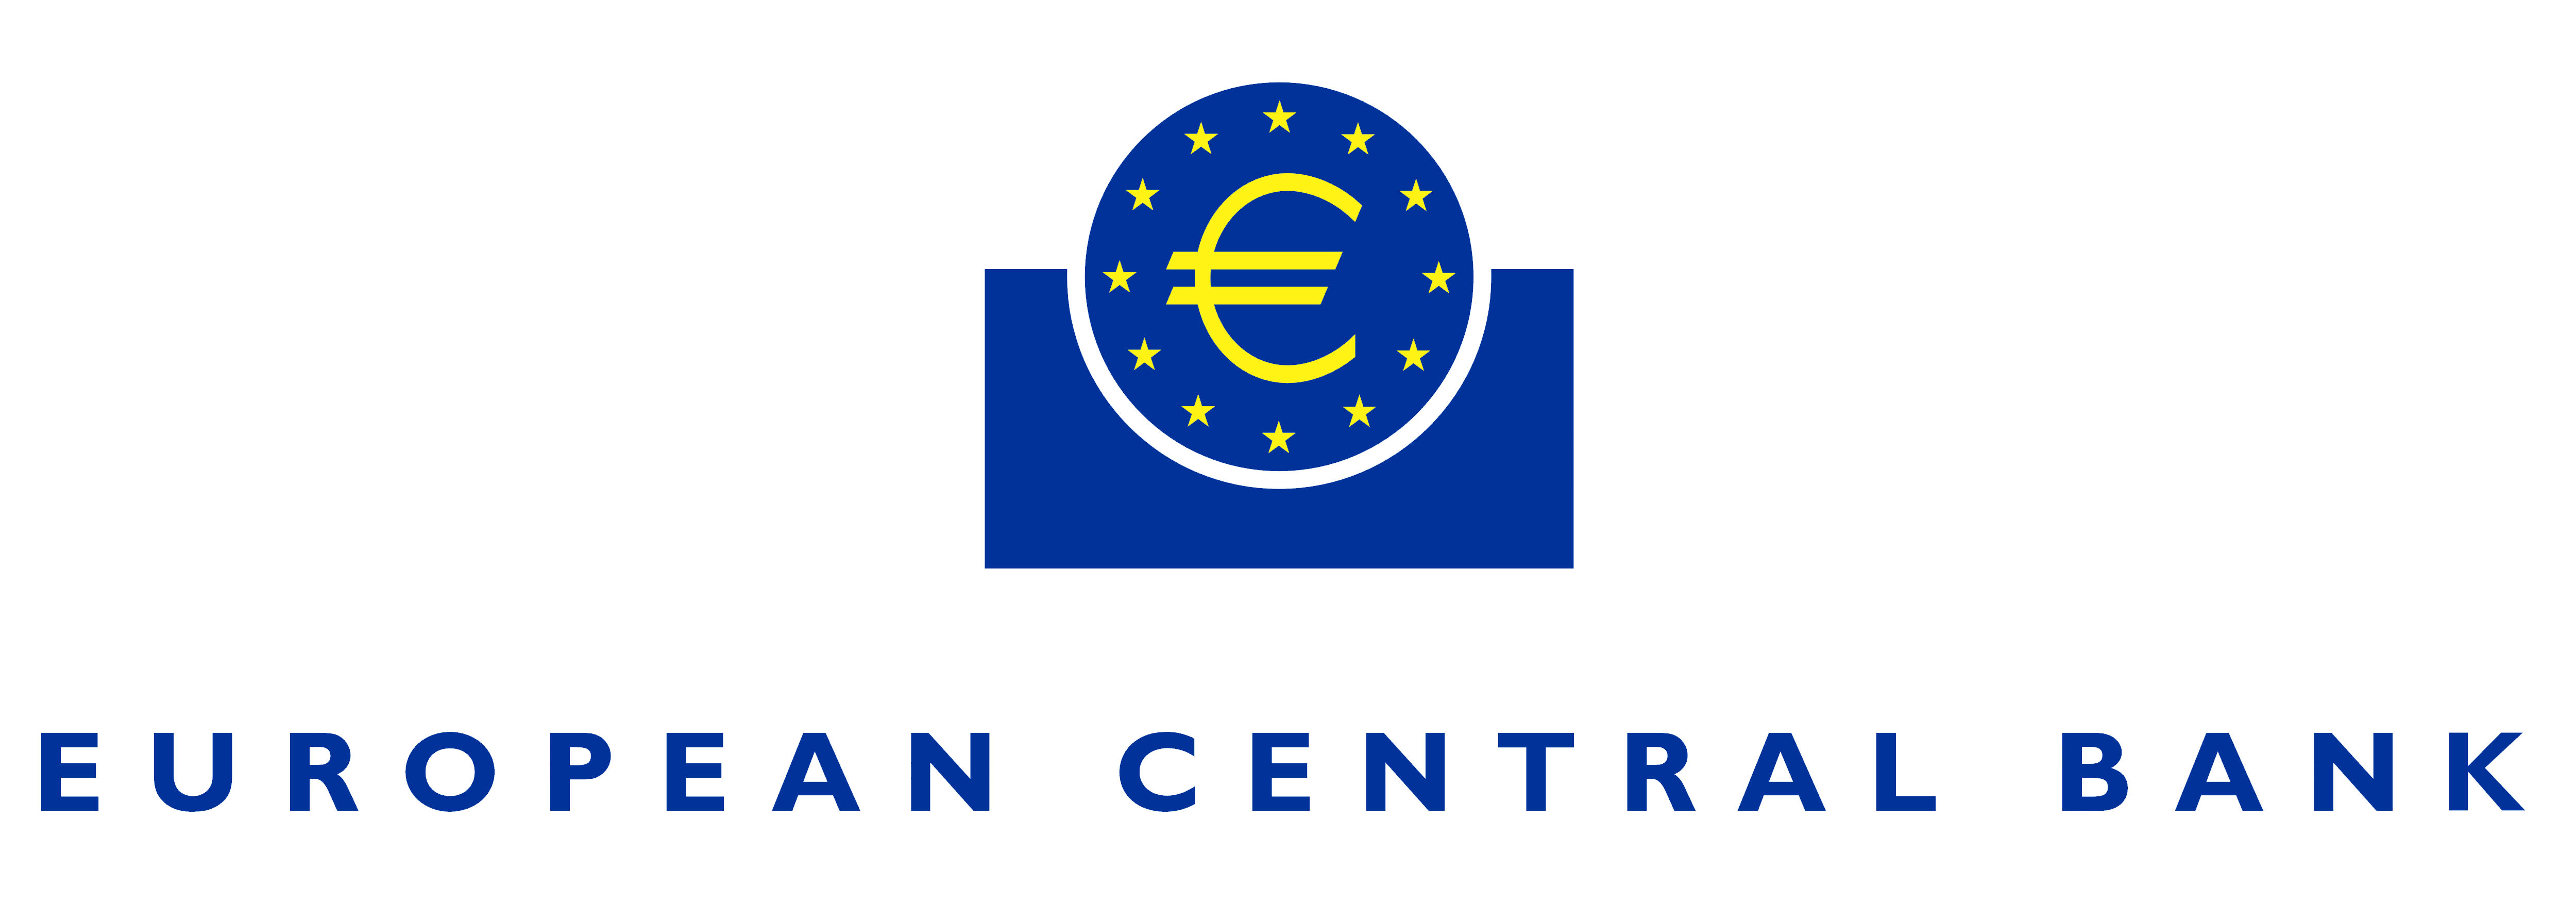  European Central Bank Proceeds Enormous Amounts Of Data By TARGET2 